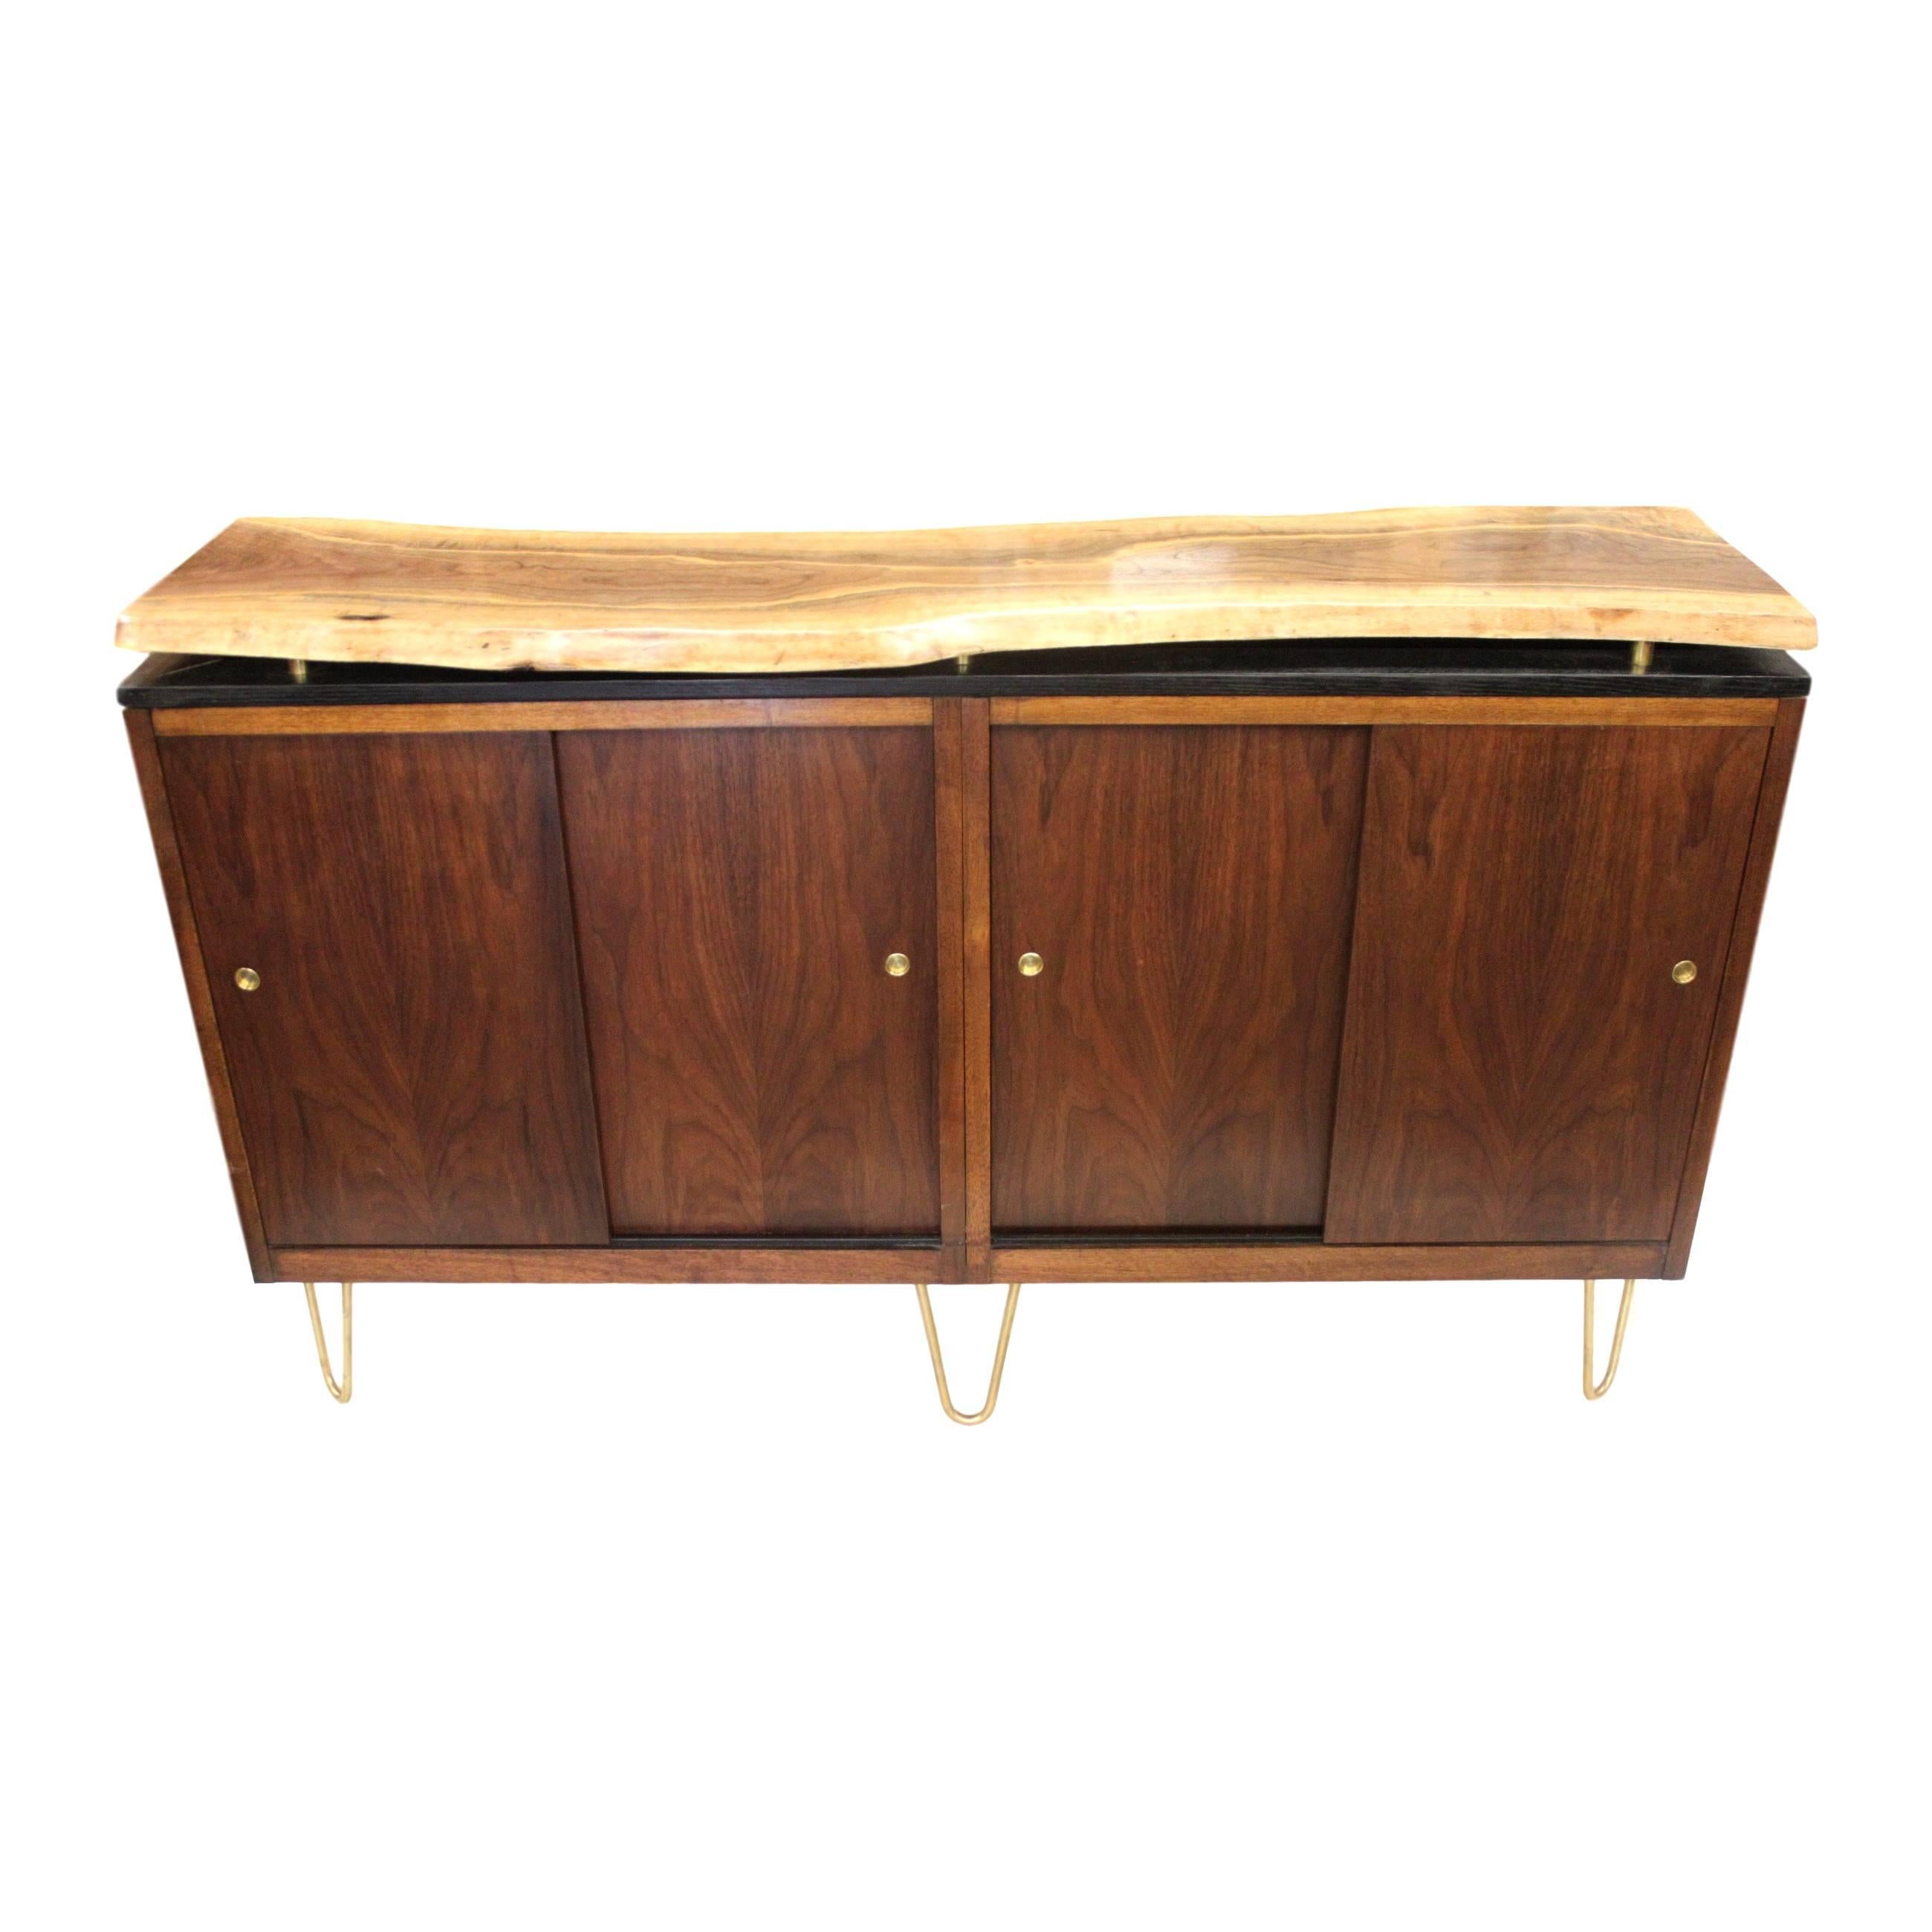 Live-edge walnut slab credenza

This custom piece began life as a lack-luster 1970s steelcase credenza complete with severe finish damage and a very unfortunate Formica top. But one look at those gorgeous book-matched walnut sliders and we knew we